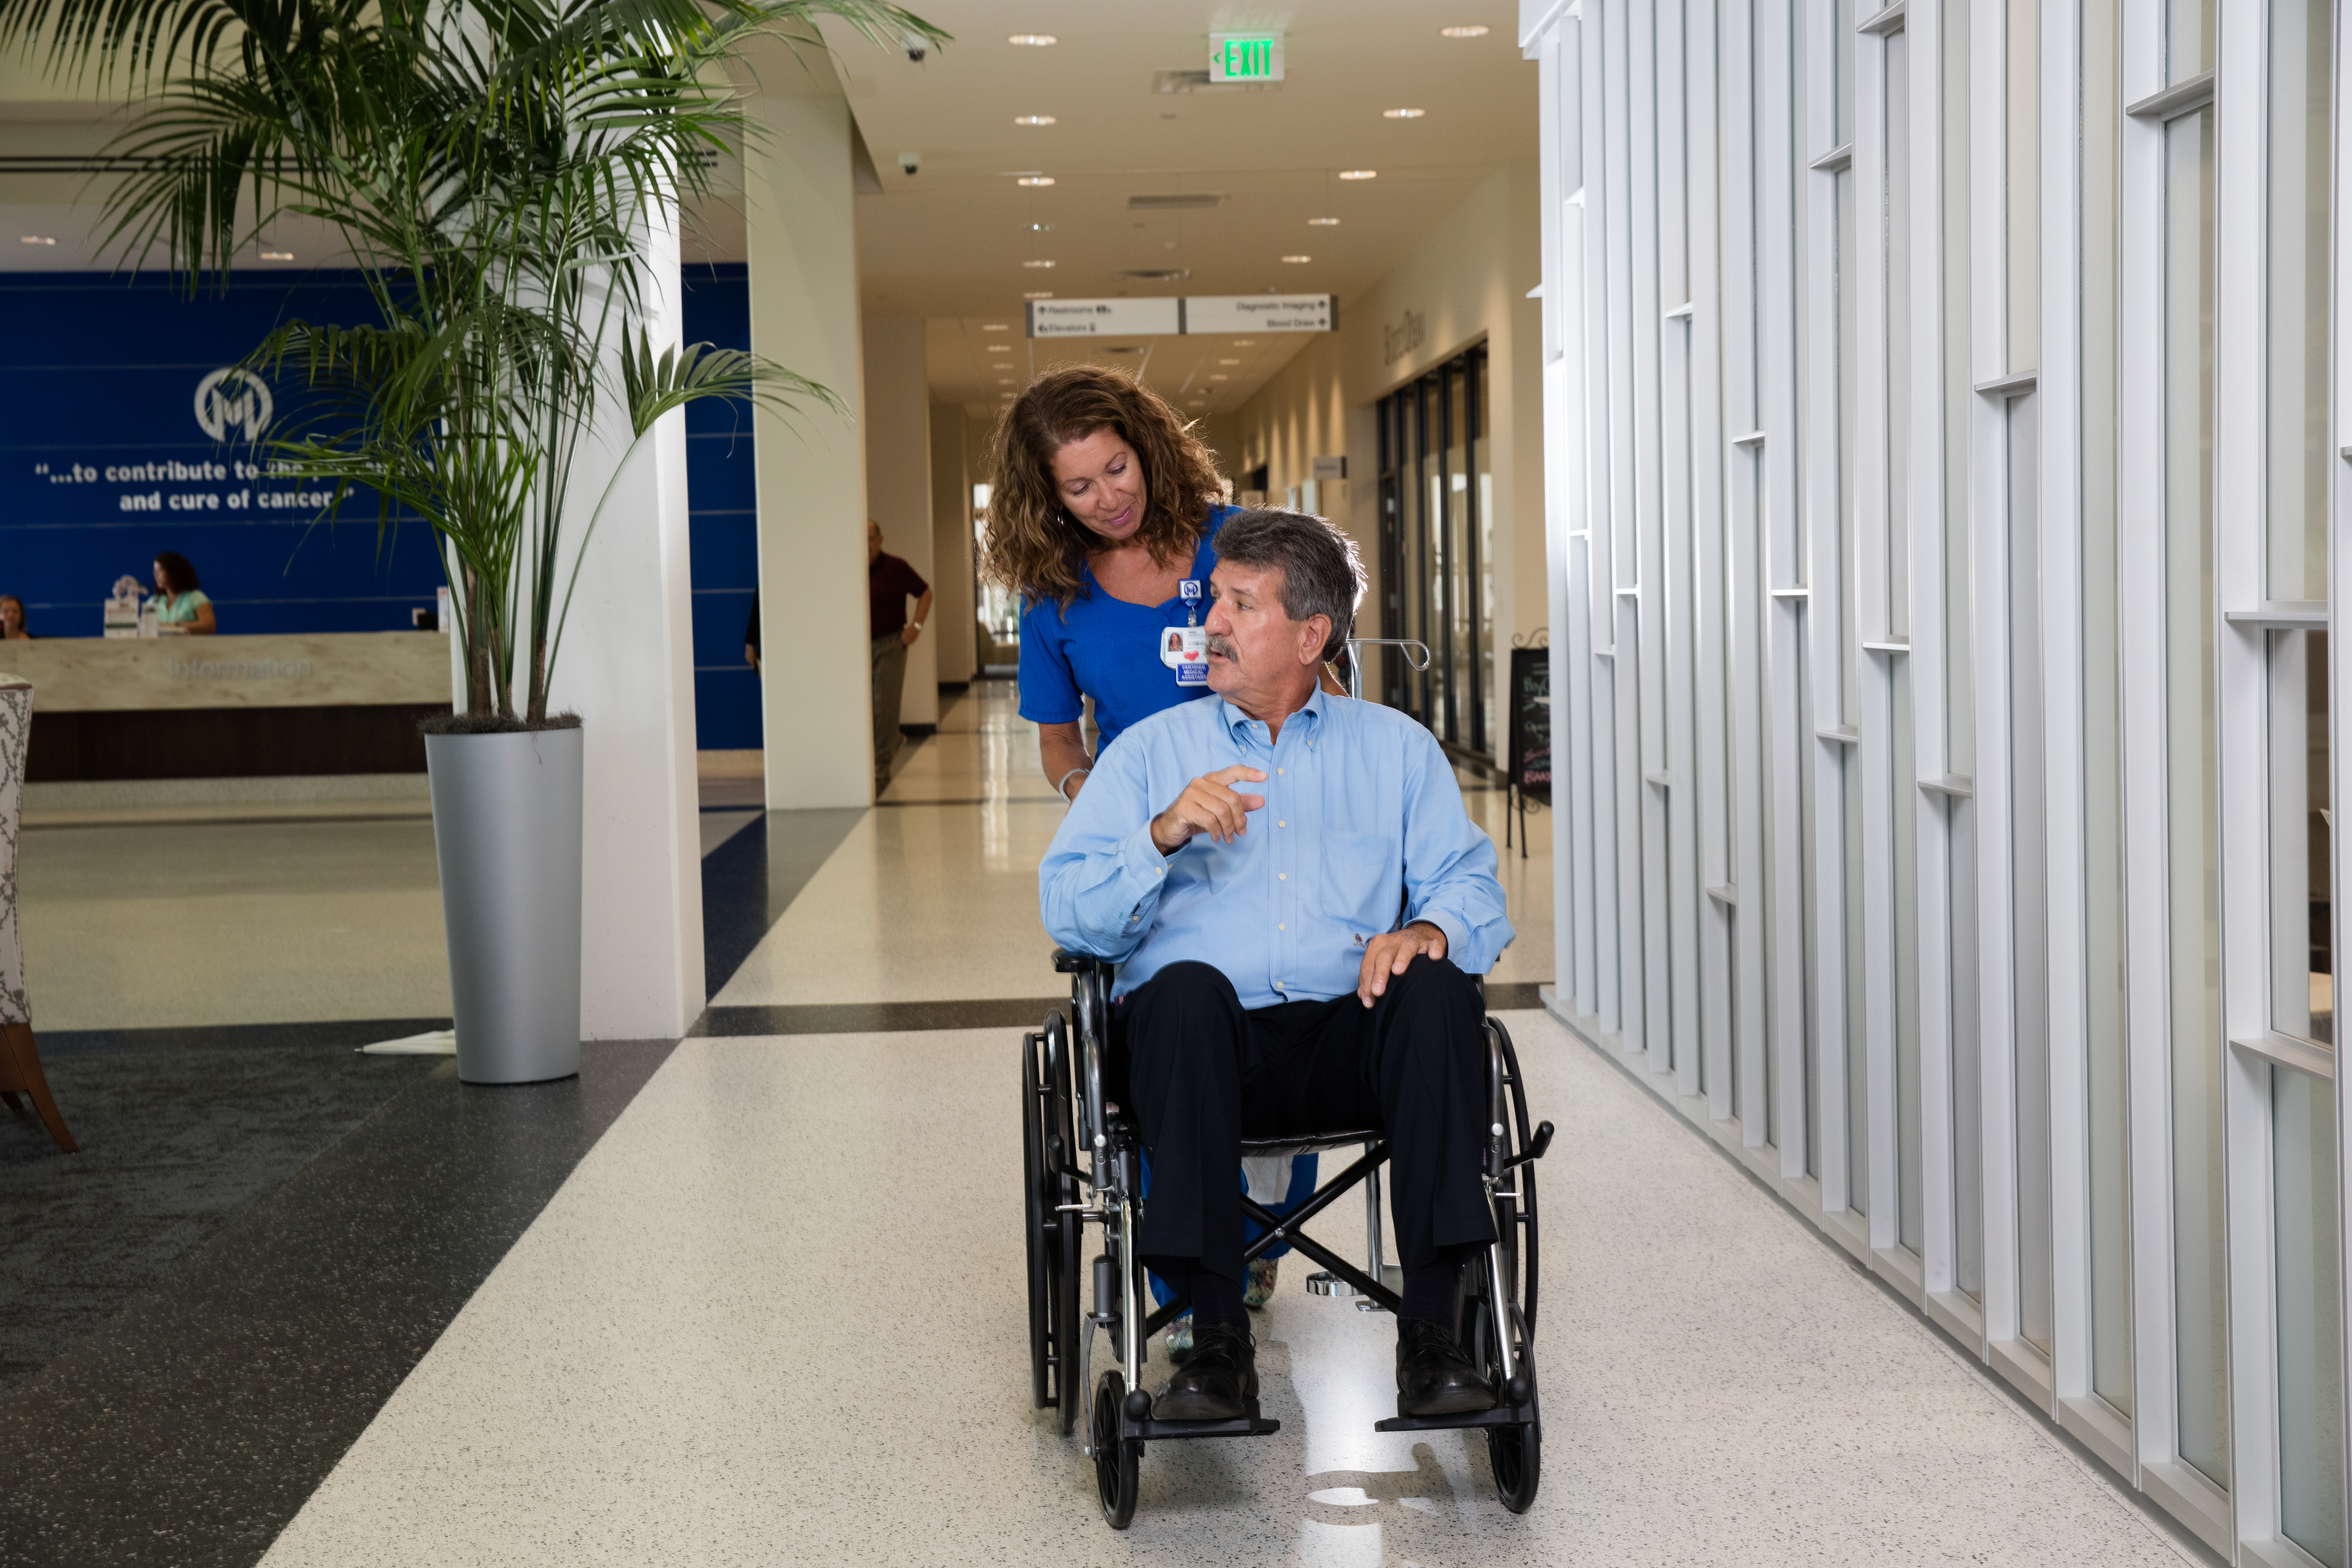 Certified Medical assistant talking with and pushing patient in wheelchair